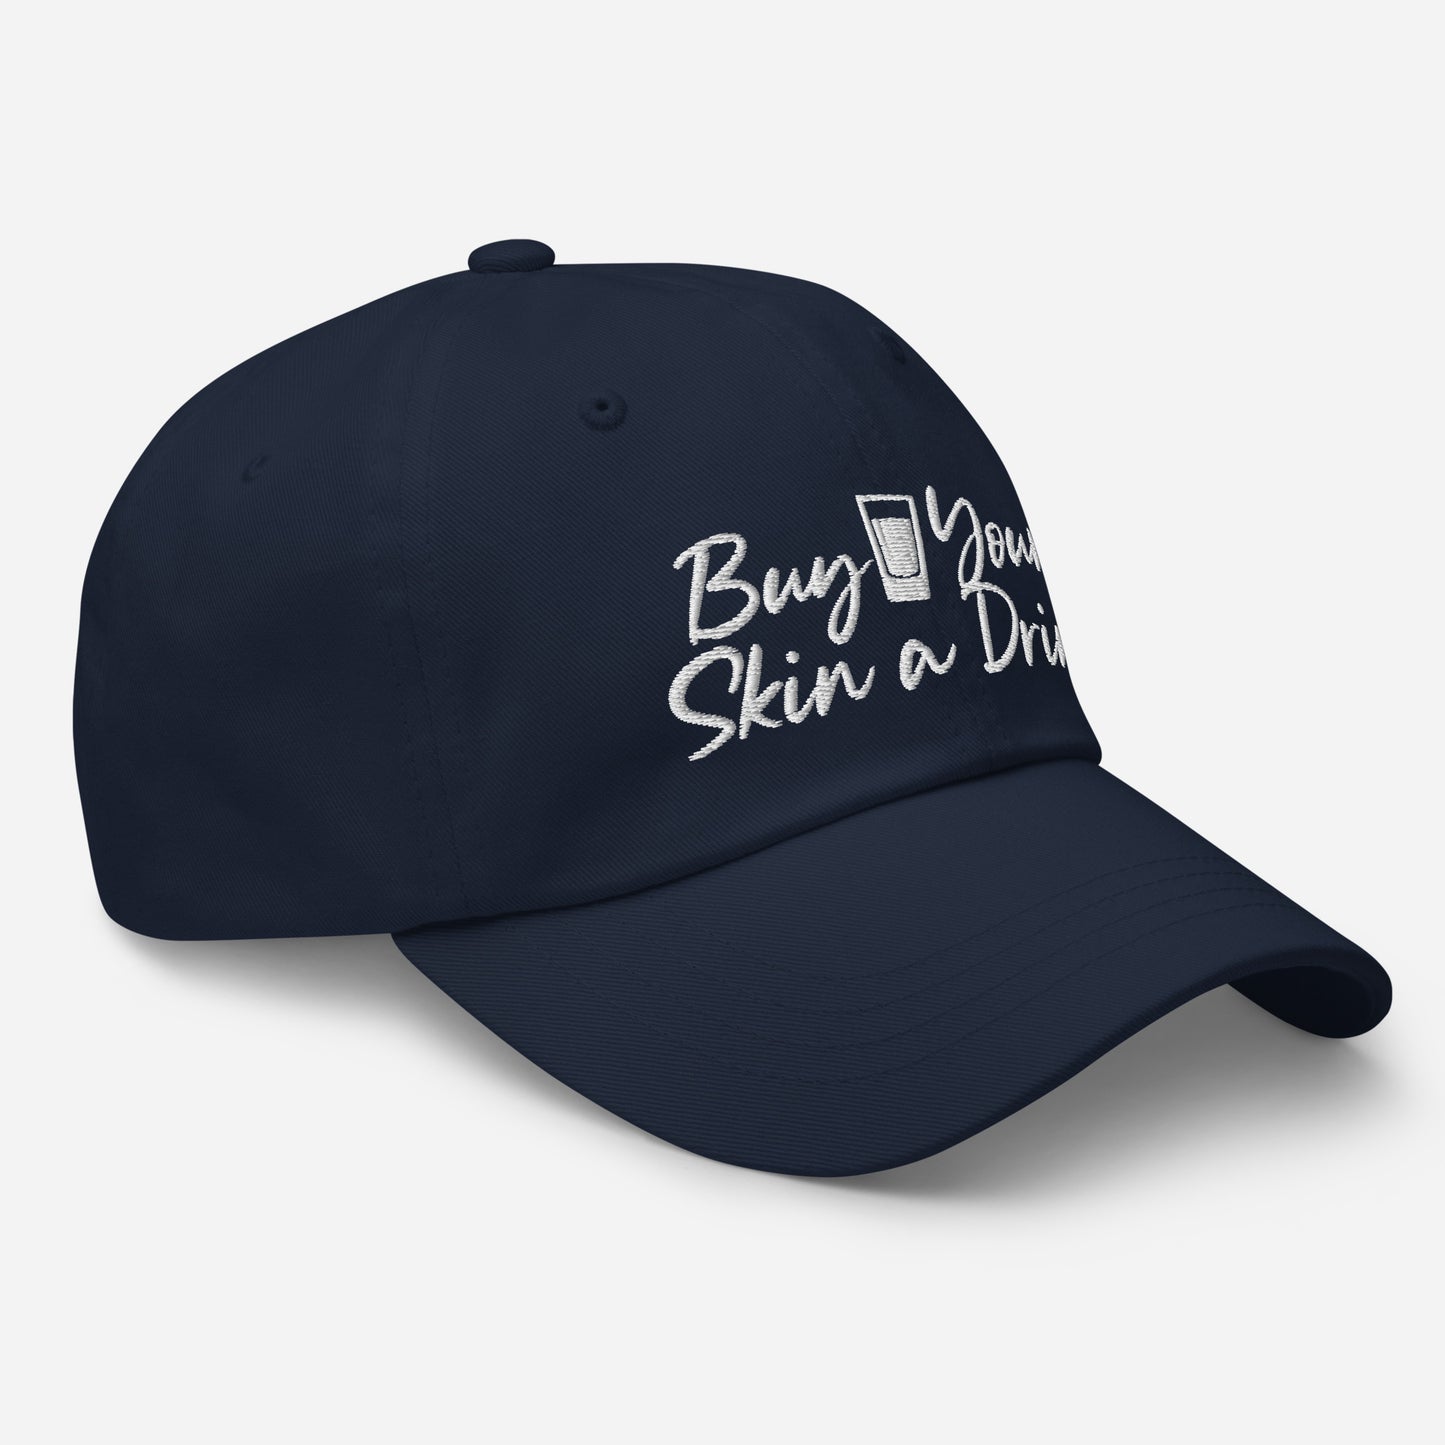 Buy Your Skin a Drink Dad hat